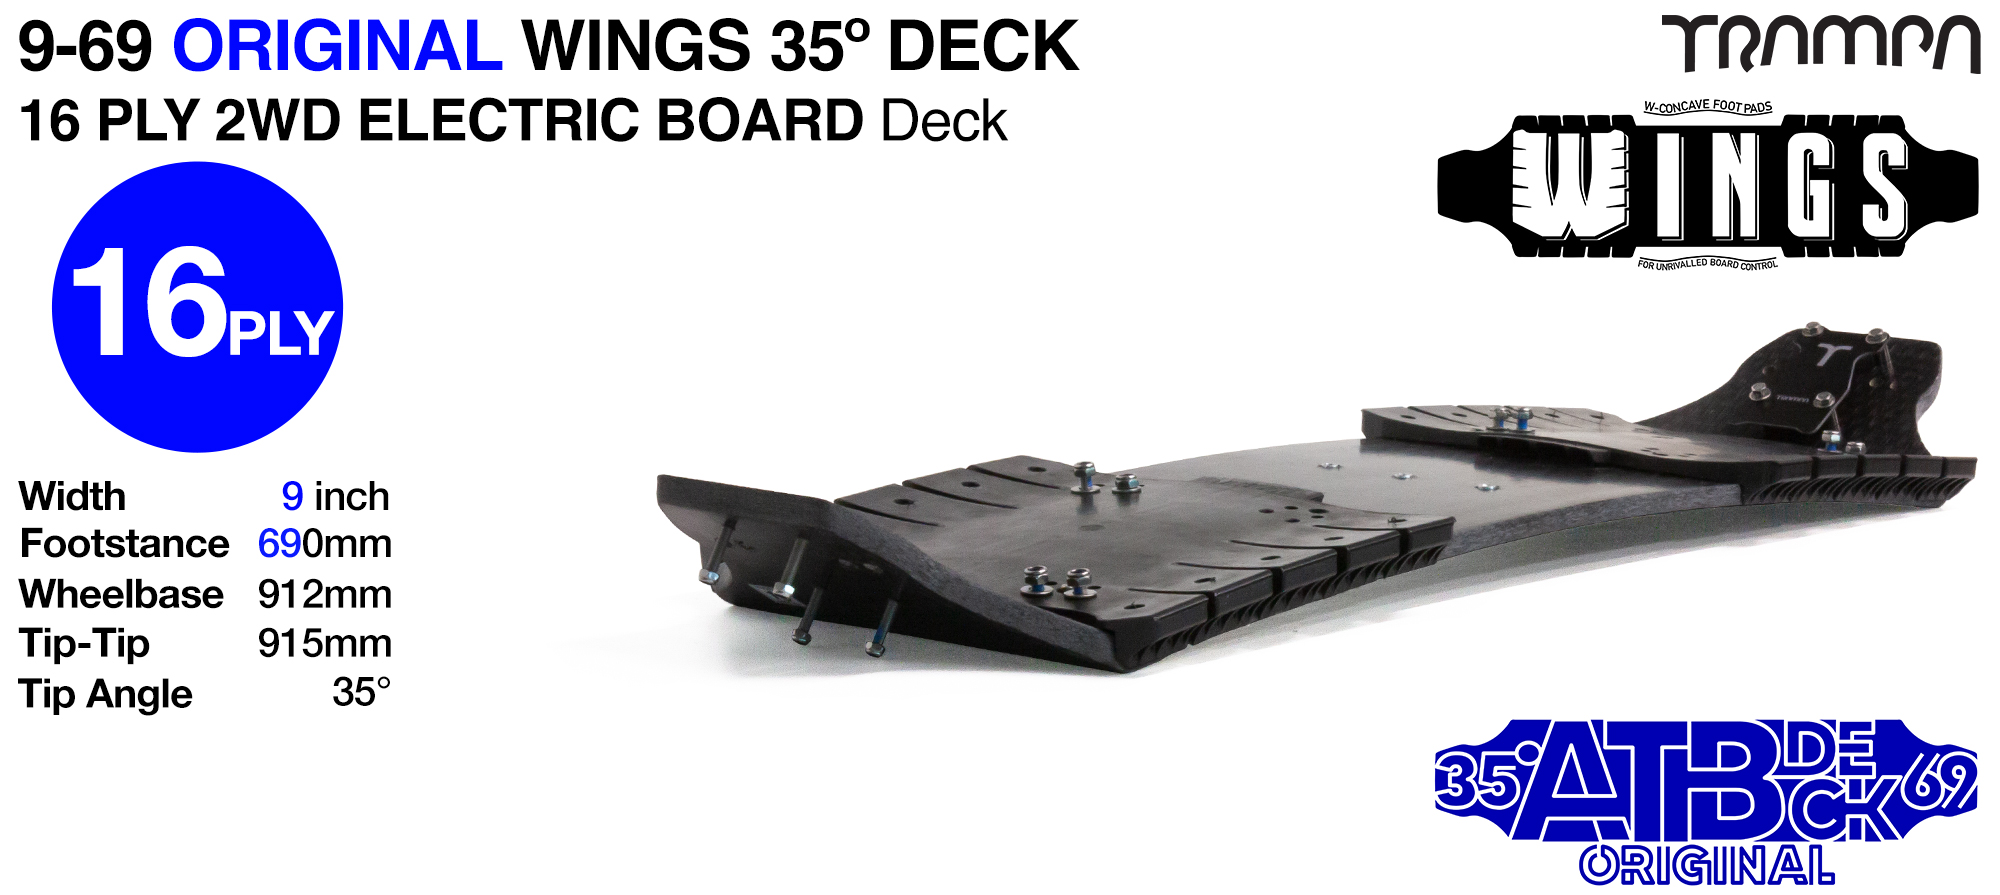 TRAMPA 35° 9/69 2WD Electric Mountainboard Deck with WINGS - WINGS give safe cable routing, adds W Shaped concave & the increase the width of the deck from 9 to 10 Inches - 16ply